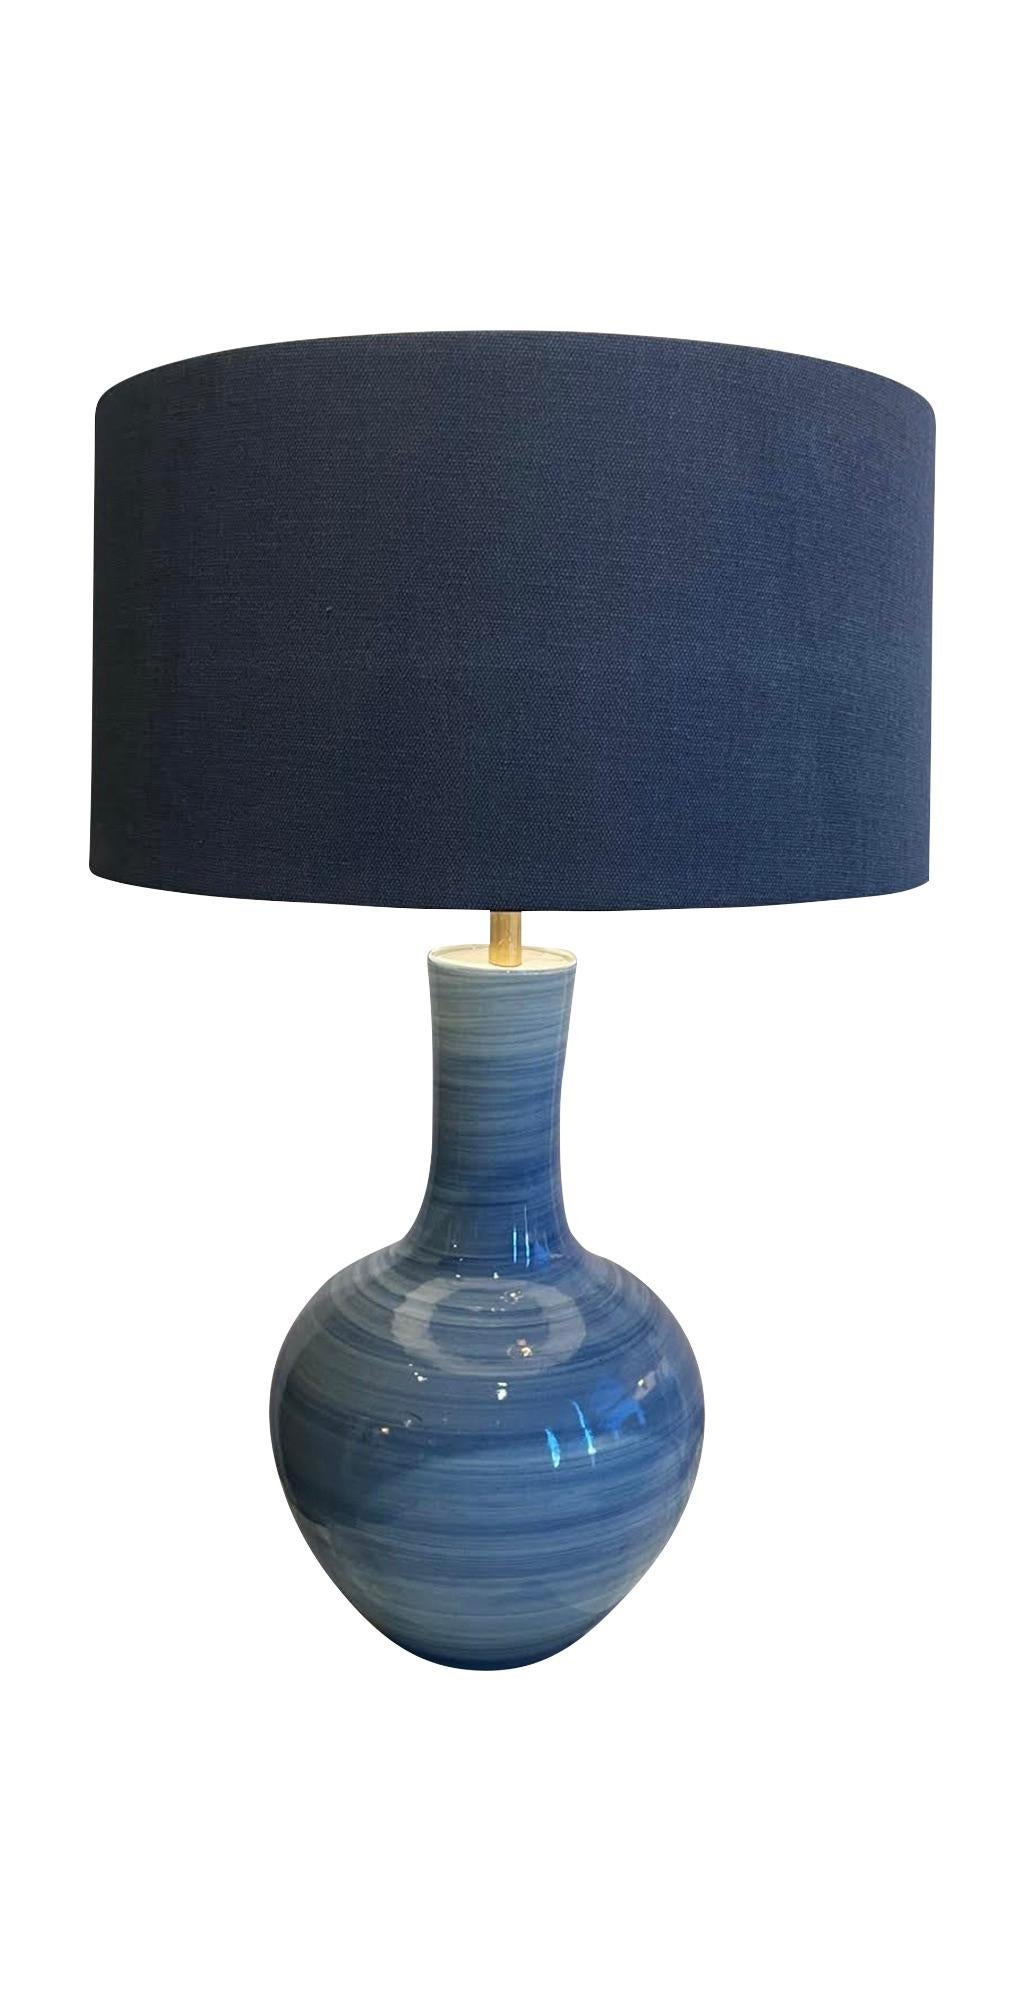 Contemporary Chinese pair blue horizontal striated design lamps.
Tube neck shaped design.
White boucle shades included.
Base diameter measures 9